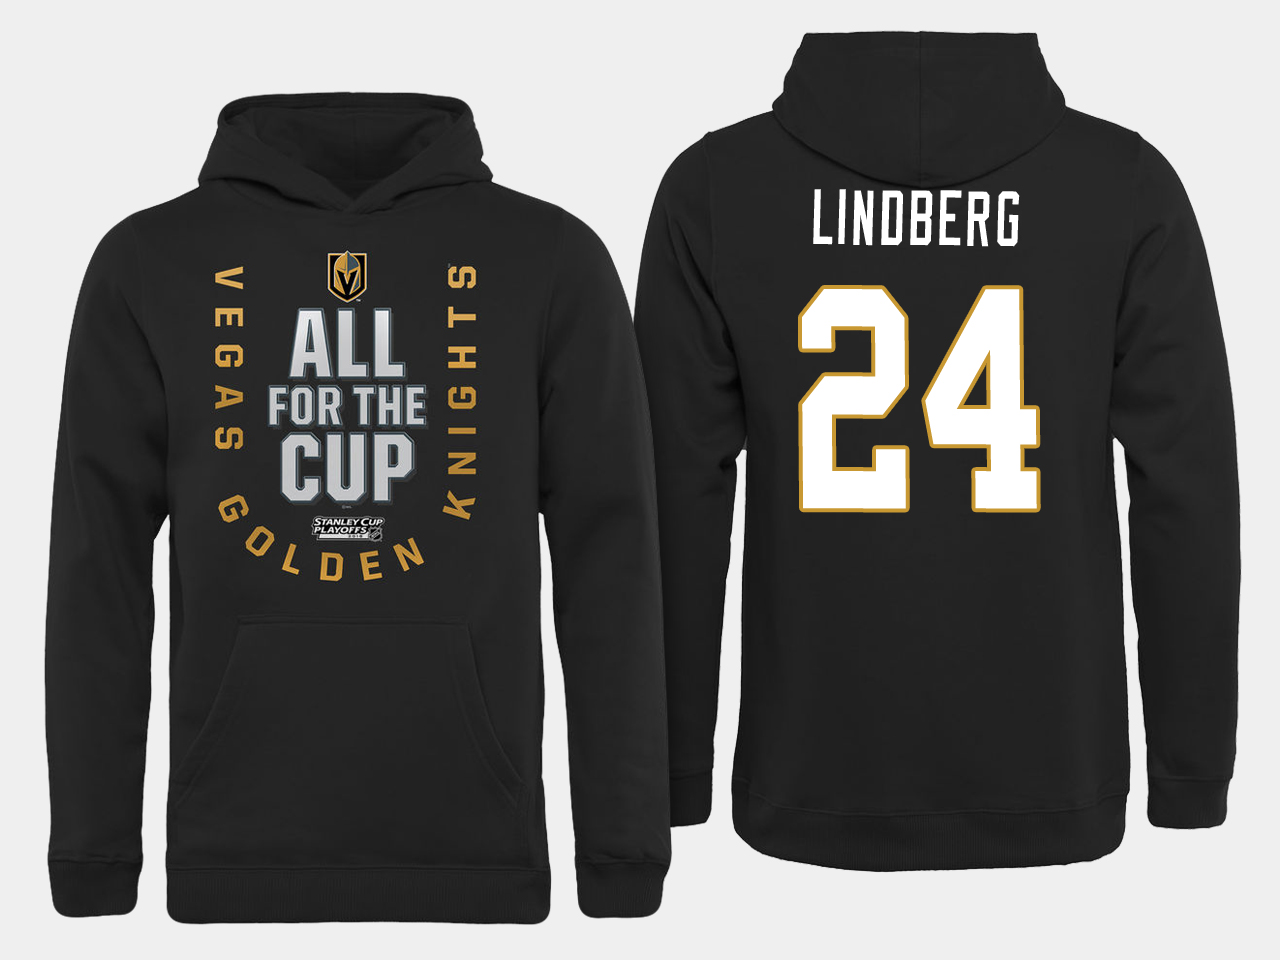 Men NHL Vegas Golden Knights #24 Lindberg All for the Cup hoodie->more nhl jerseys->NHL Jersey